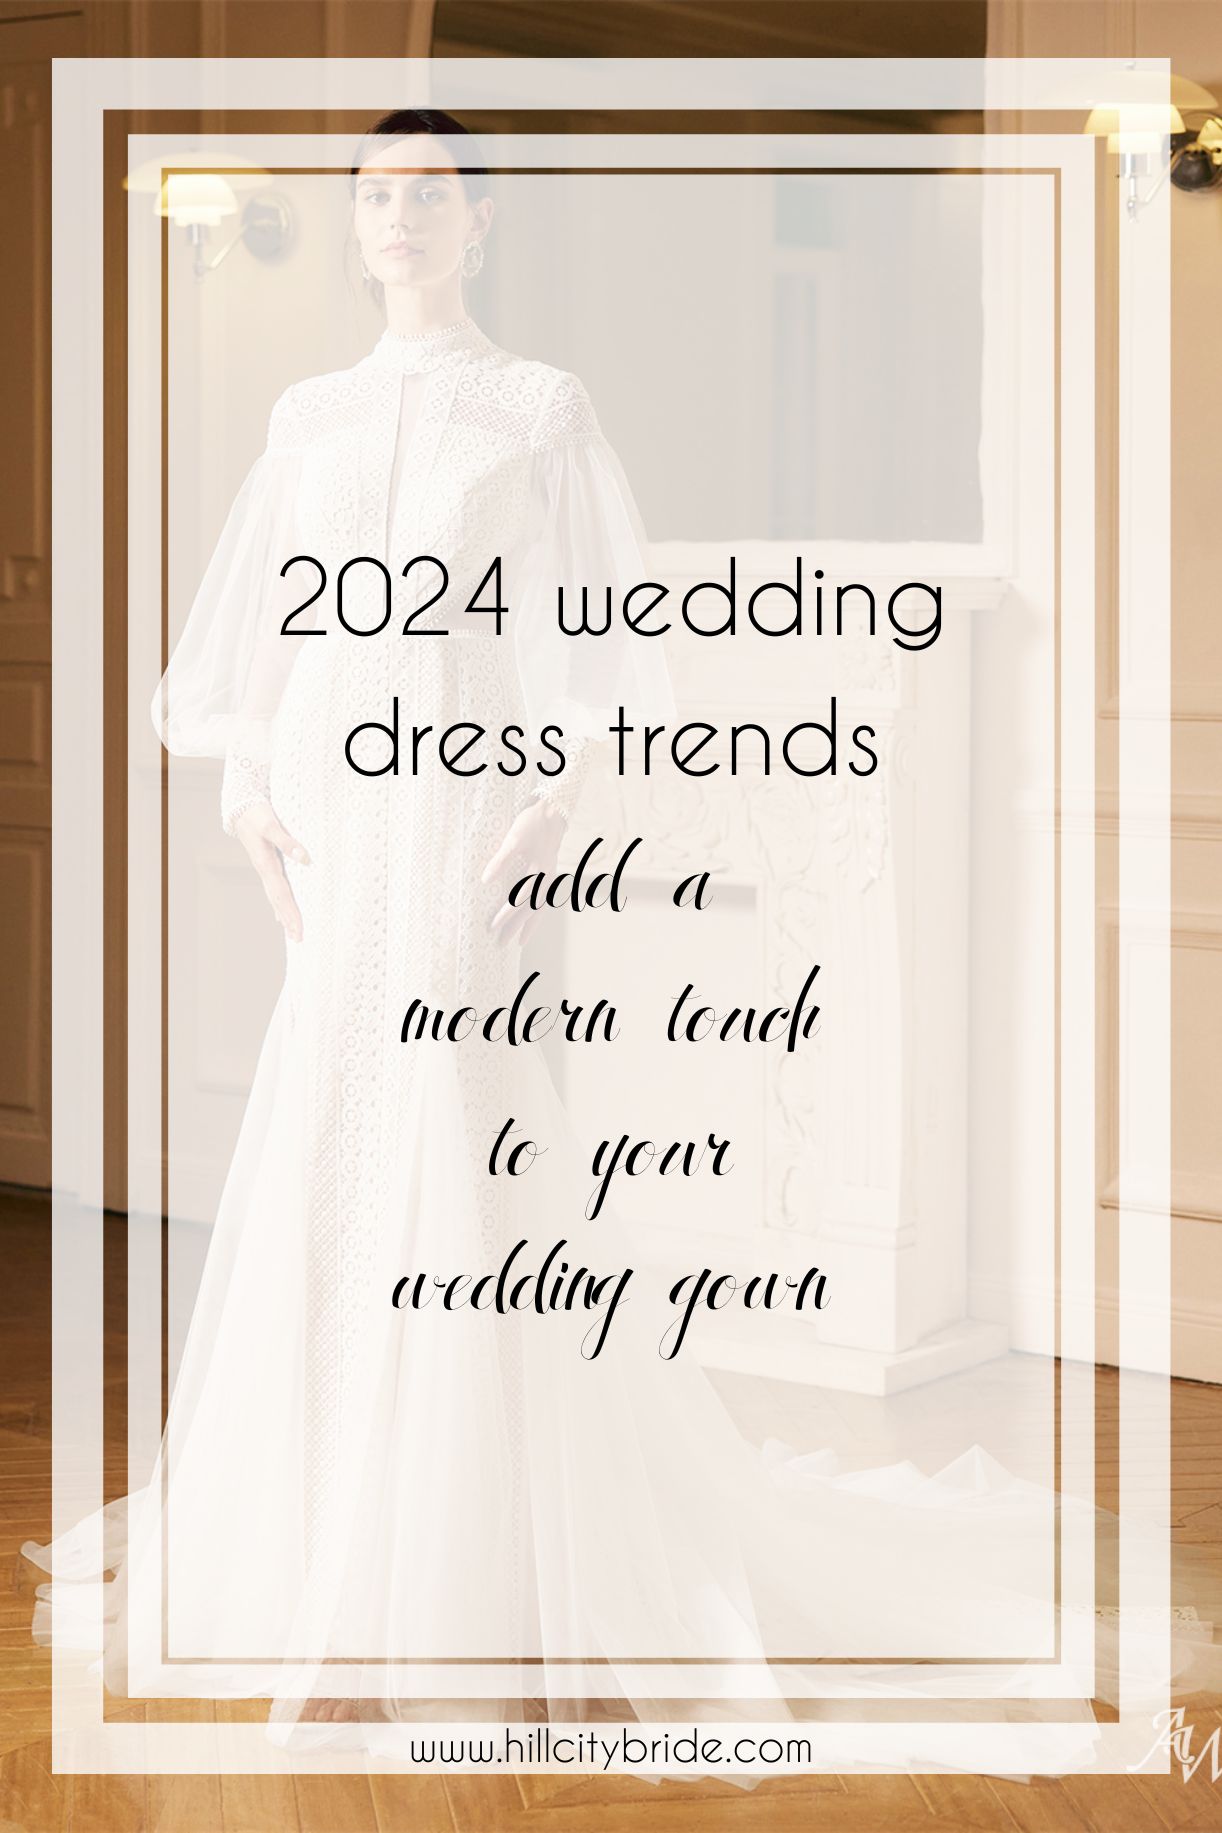 11 Posh 2024 Wedding Dress Trends to Follow for the Perfect Look